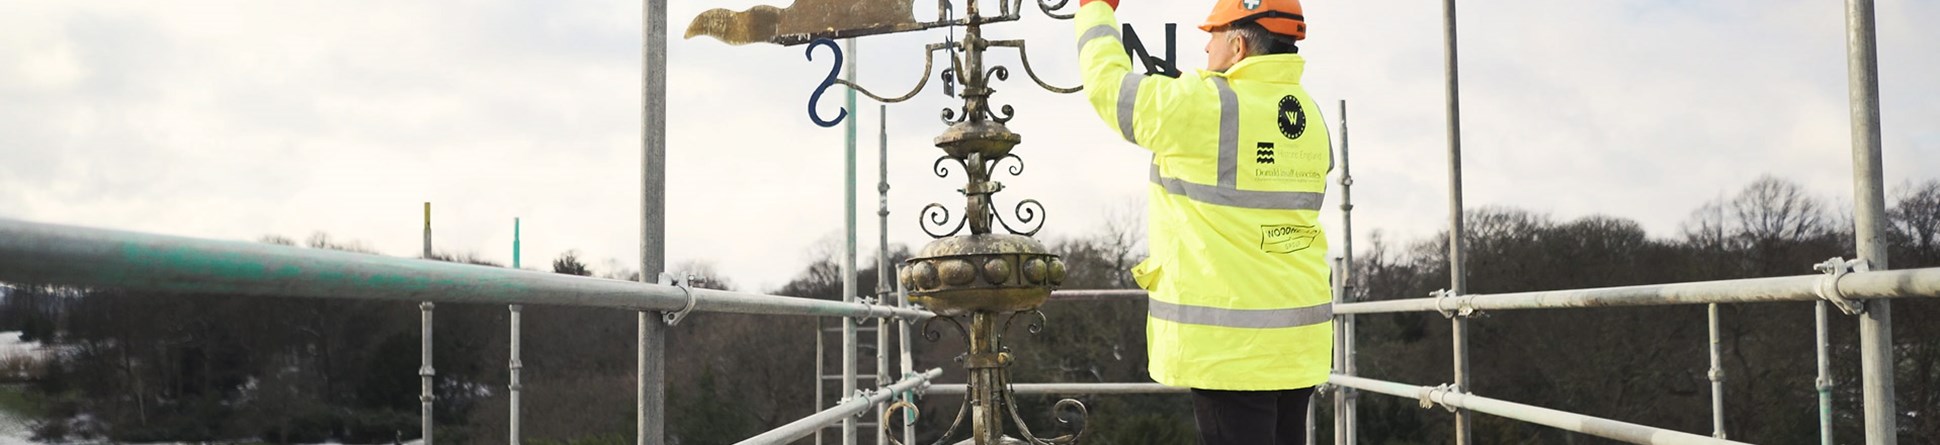 Heritage craftsman in a hard hat and high visibility jacket stands on scaffolding on the Wentworth Woodhouse, and reaches up to the weathervane. The sky behind him is cloudy.